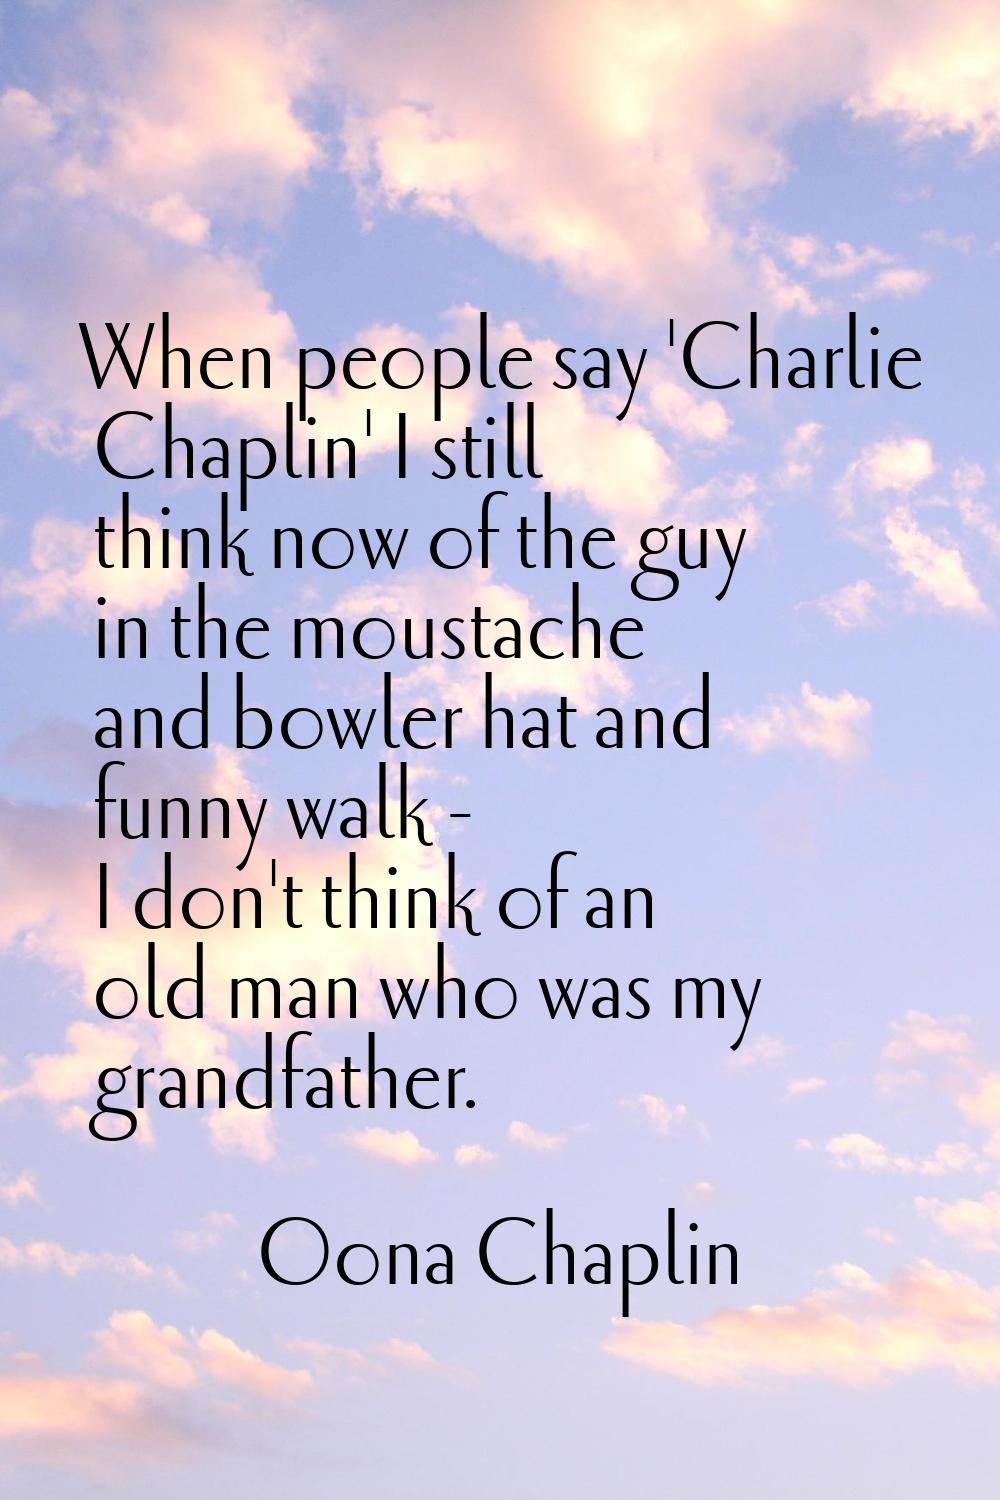 When people say 'Charlie Chaplin' I still think now of the guy in the moustache and bowler hat and 